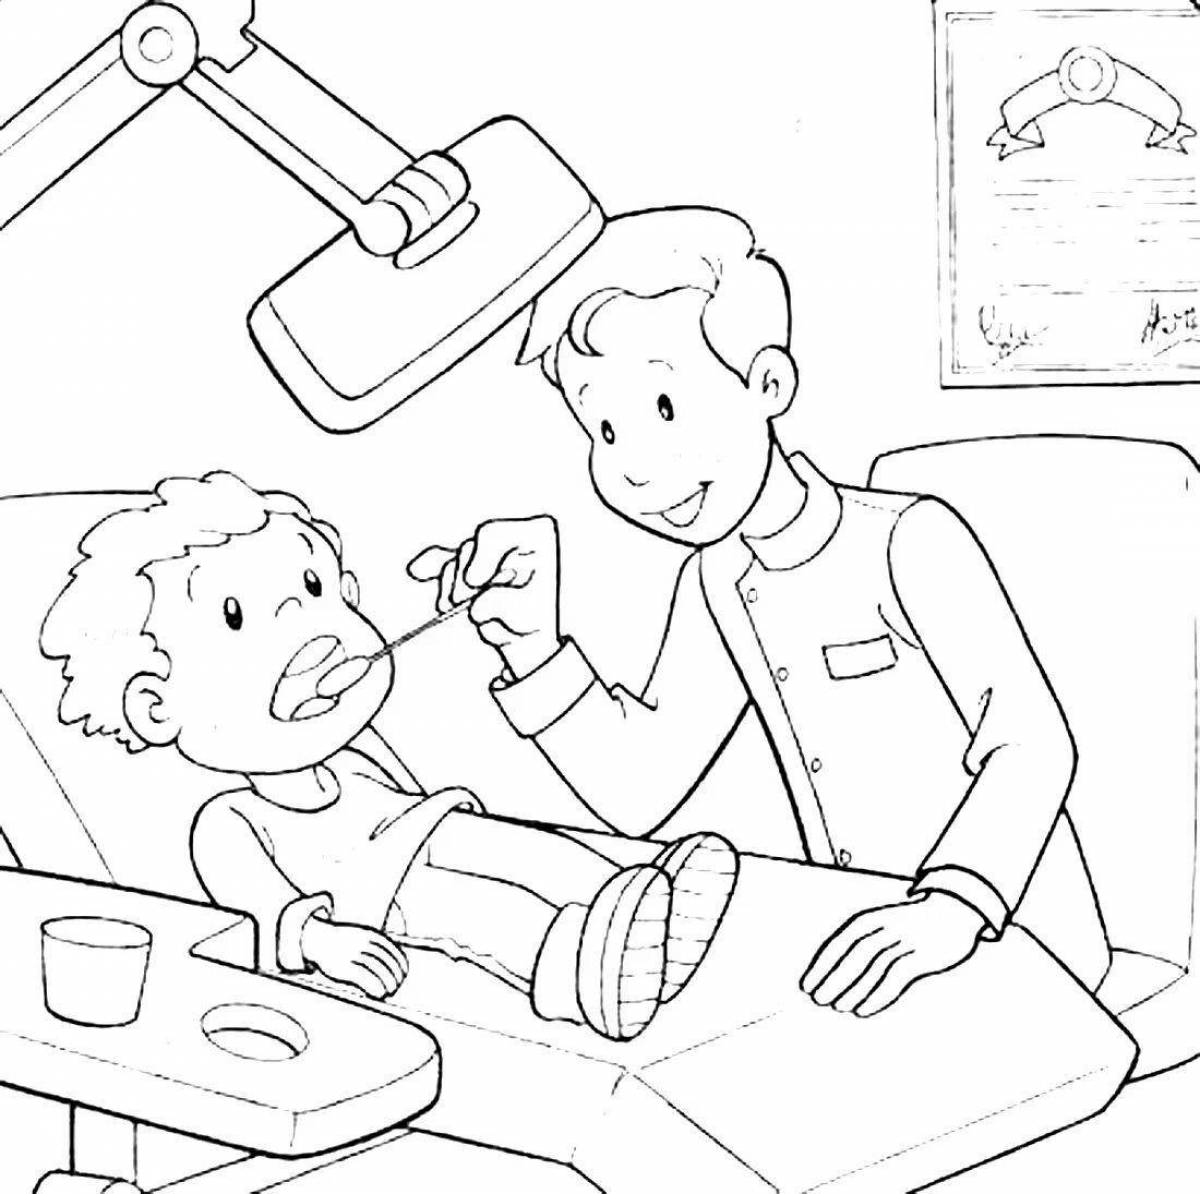 Exquisite gosh and world coloring page